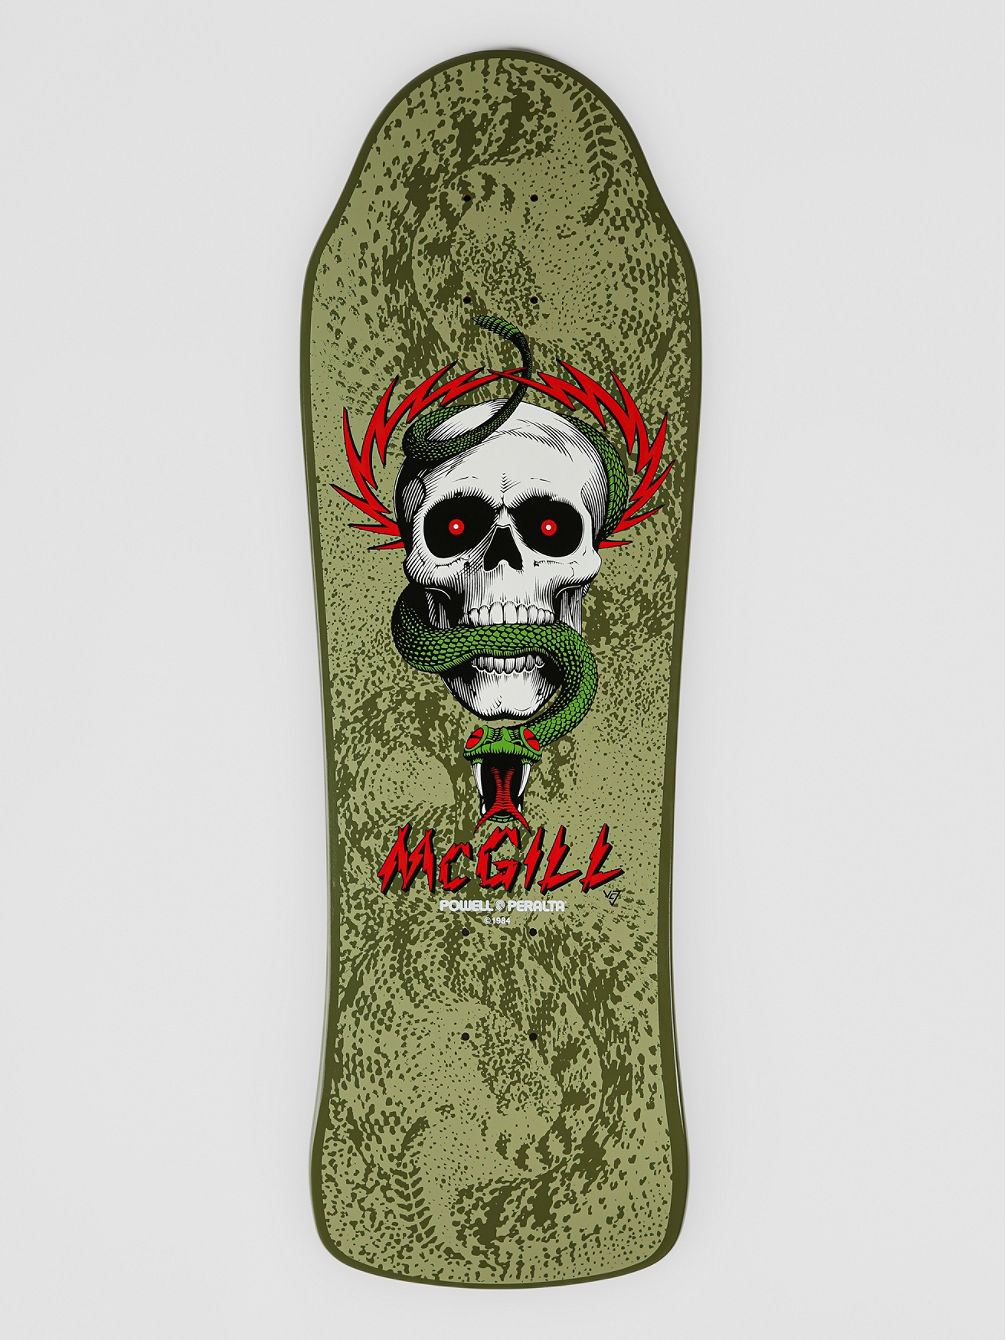 Mike McGill Limited Edition 3 9.9&amp;#034; Skateboard Deck